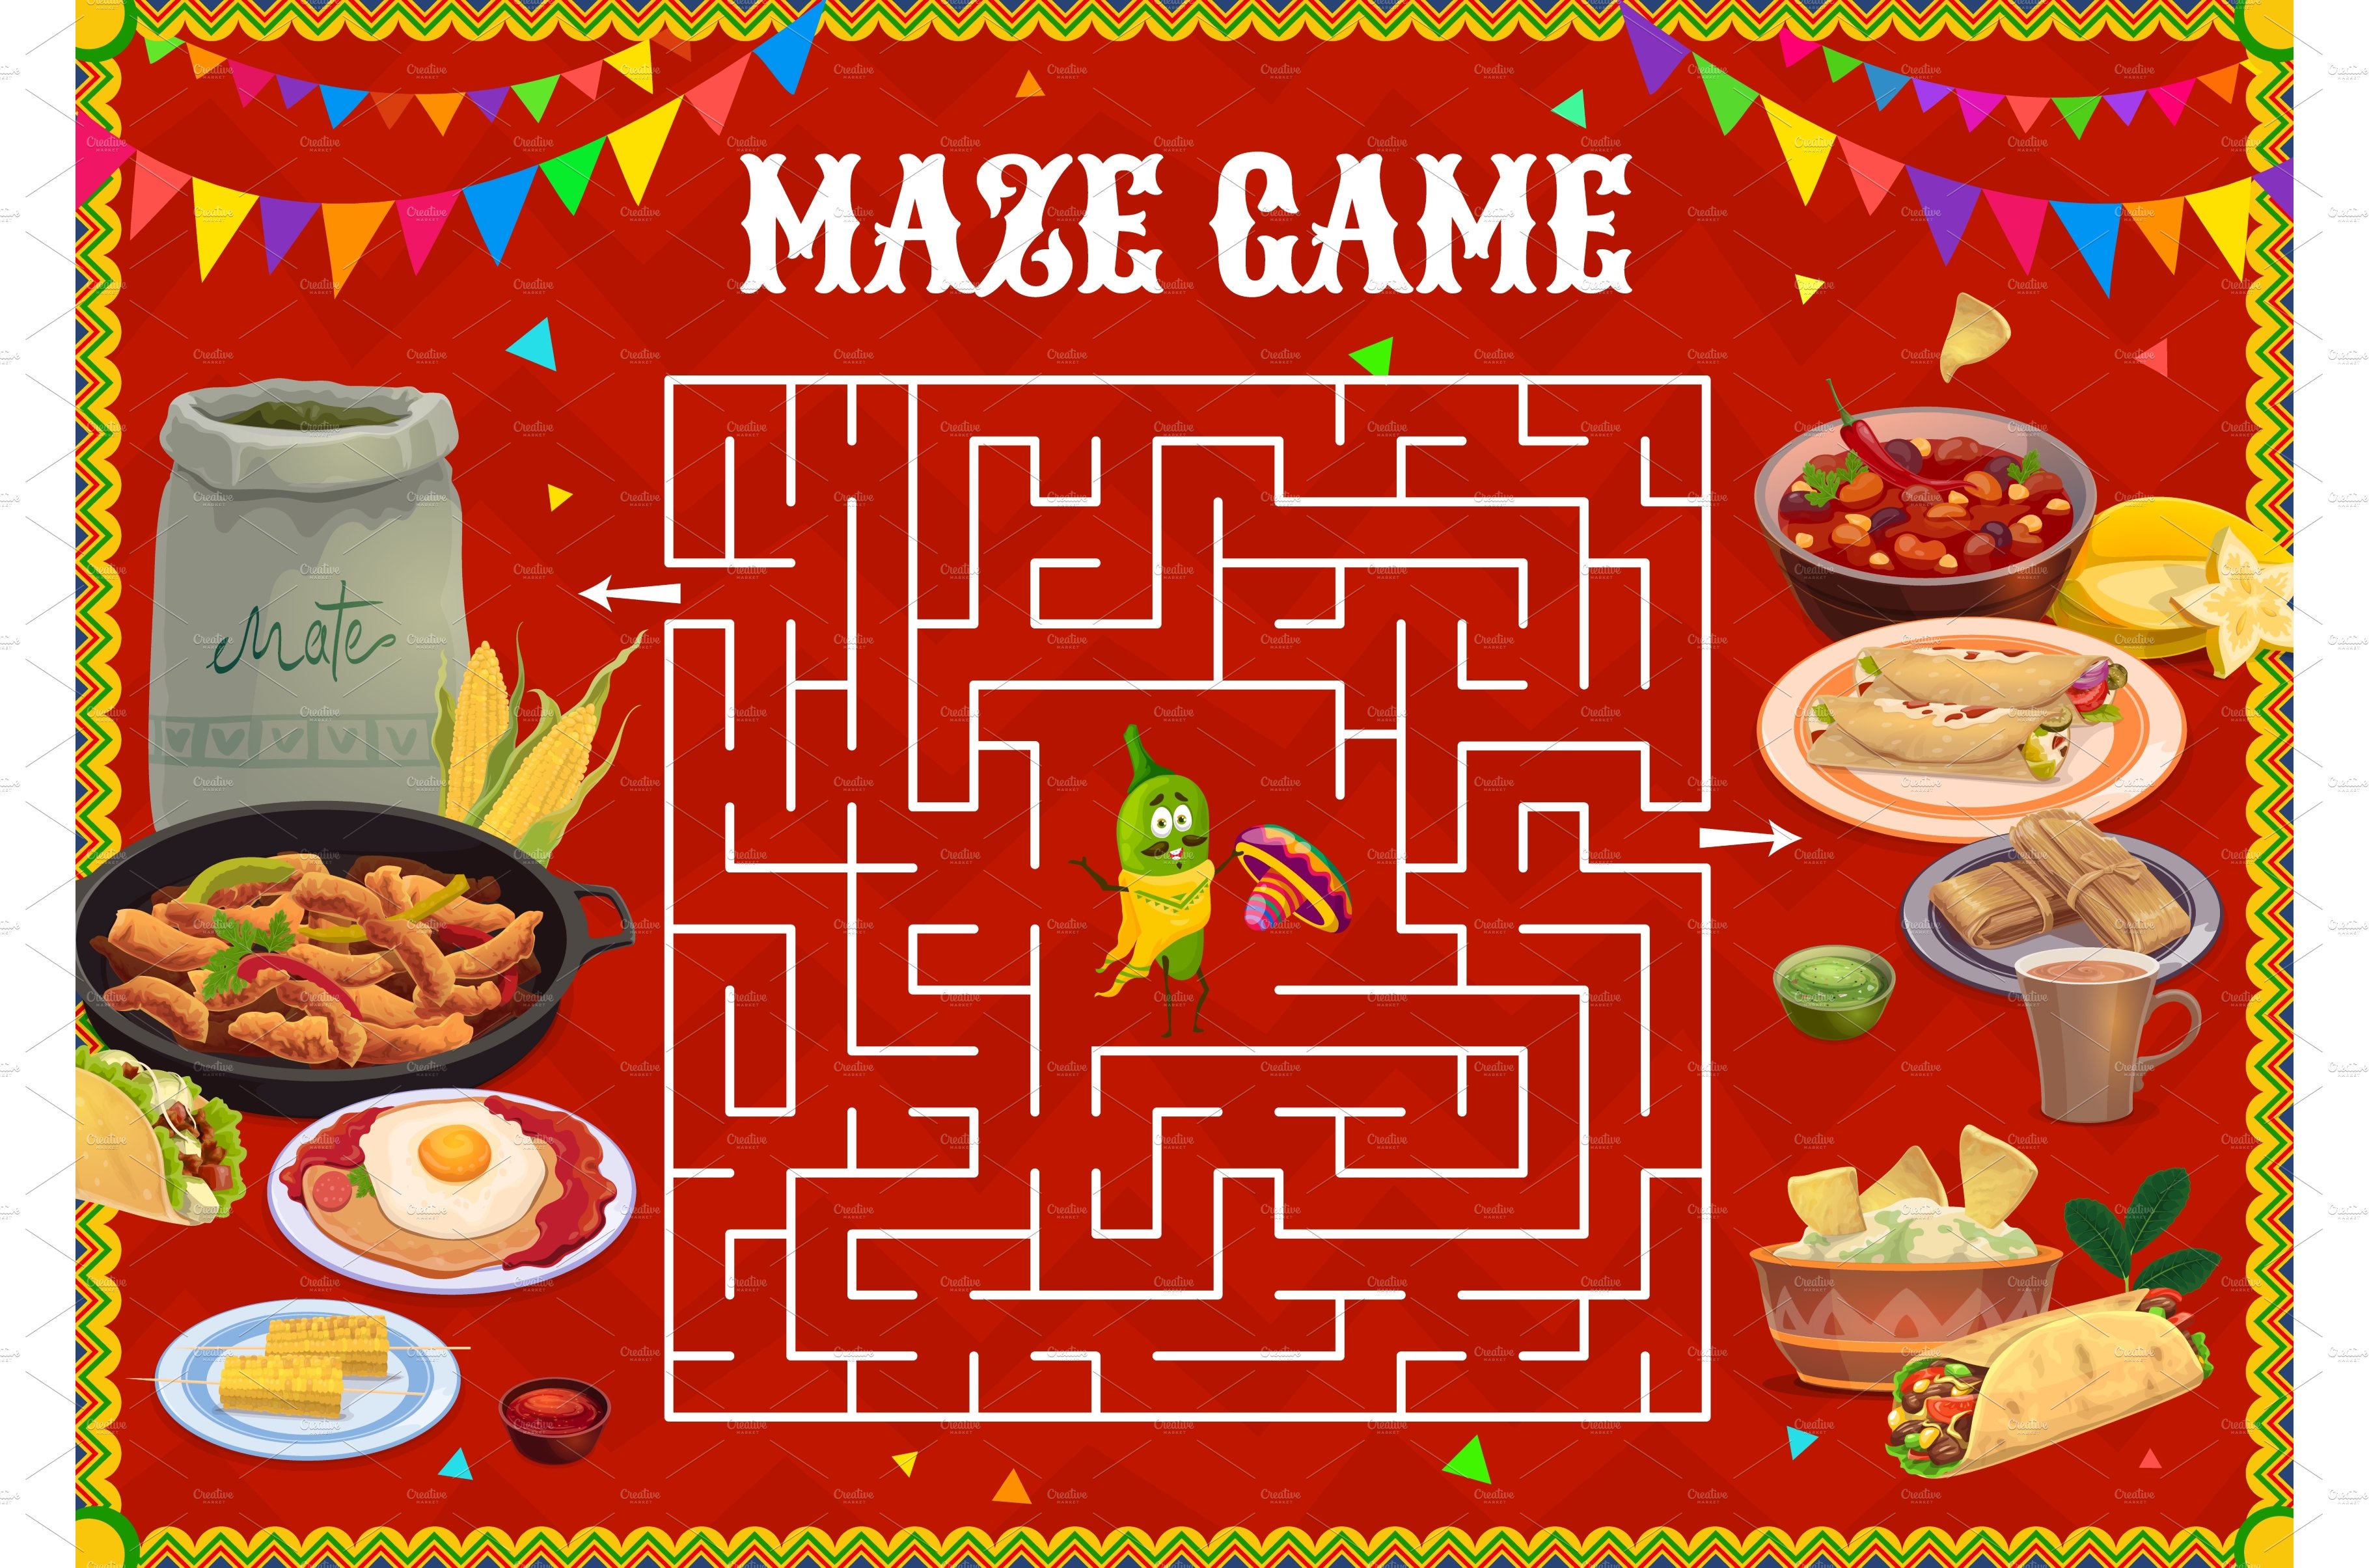 Labyrinth maze game, mexican food cover image.